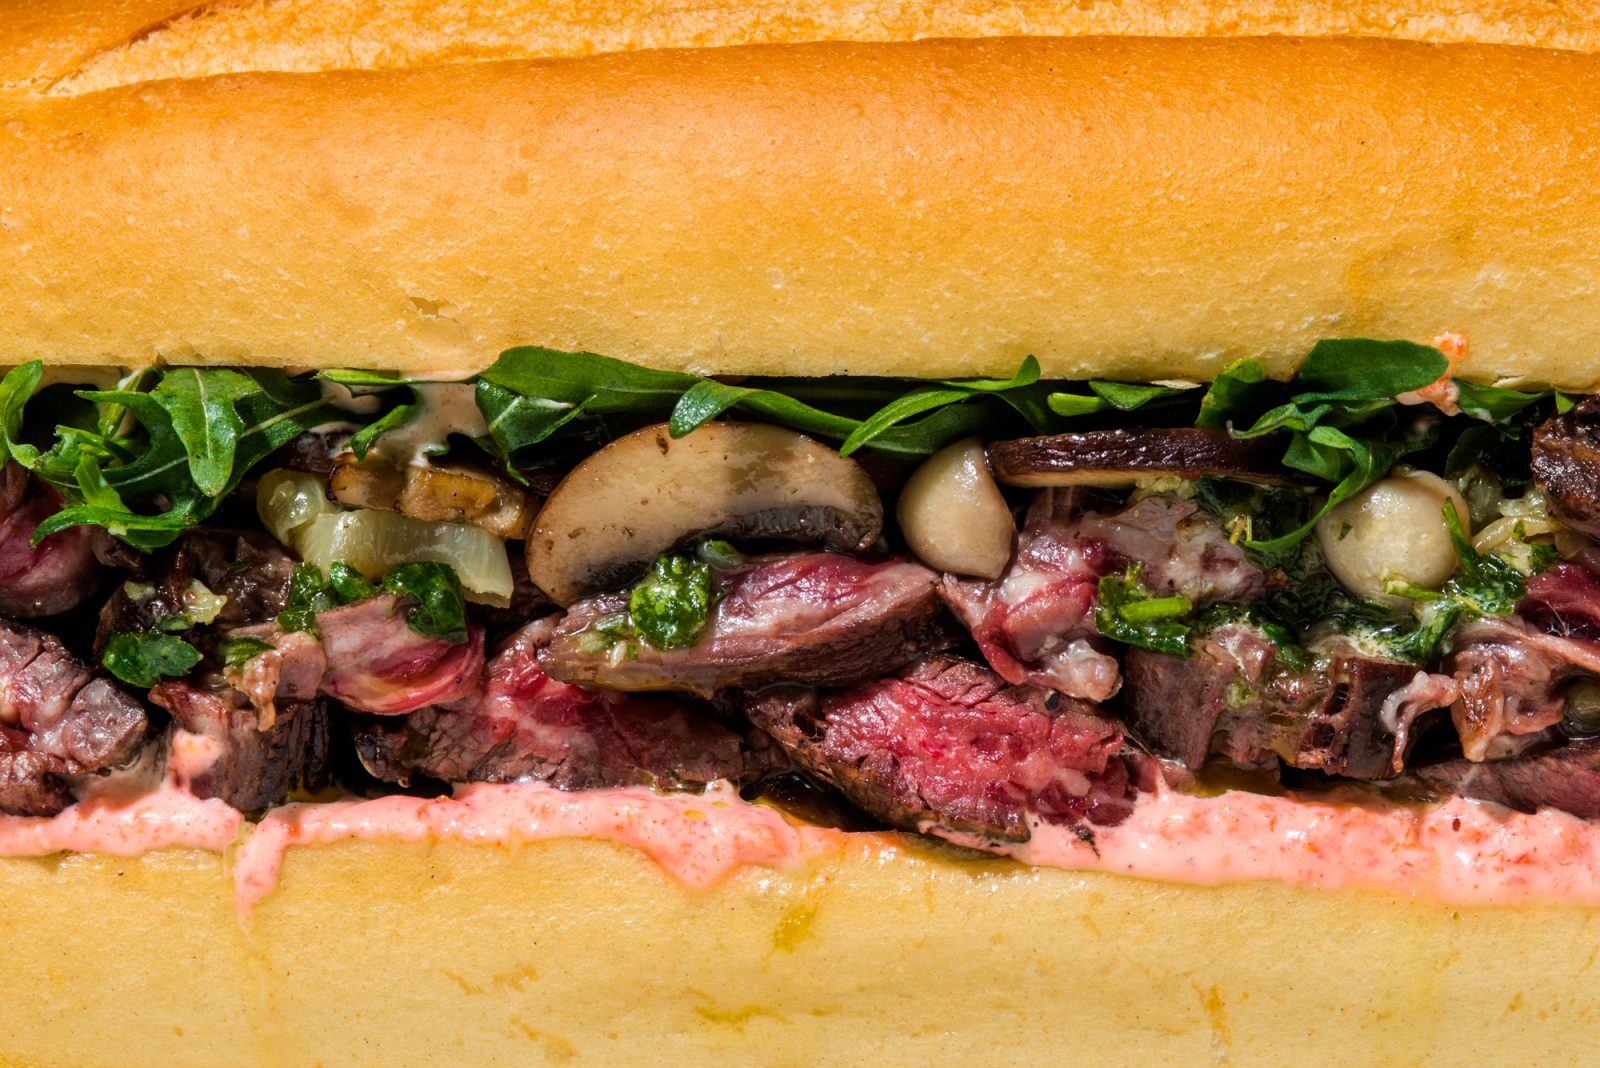 Yummy SKIRT STEAK CIABATTA SANDWICH   Follow tradefoods for more   TAG YOUR FRIENDS Turn on Post Notifications     Instagram